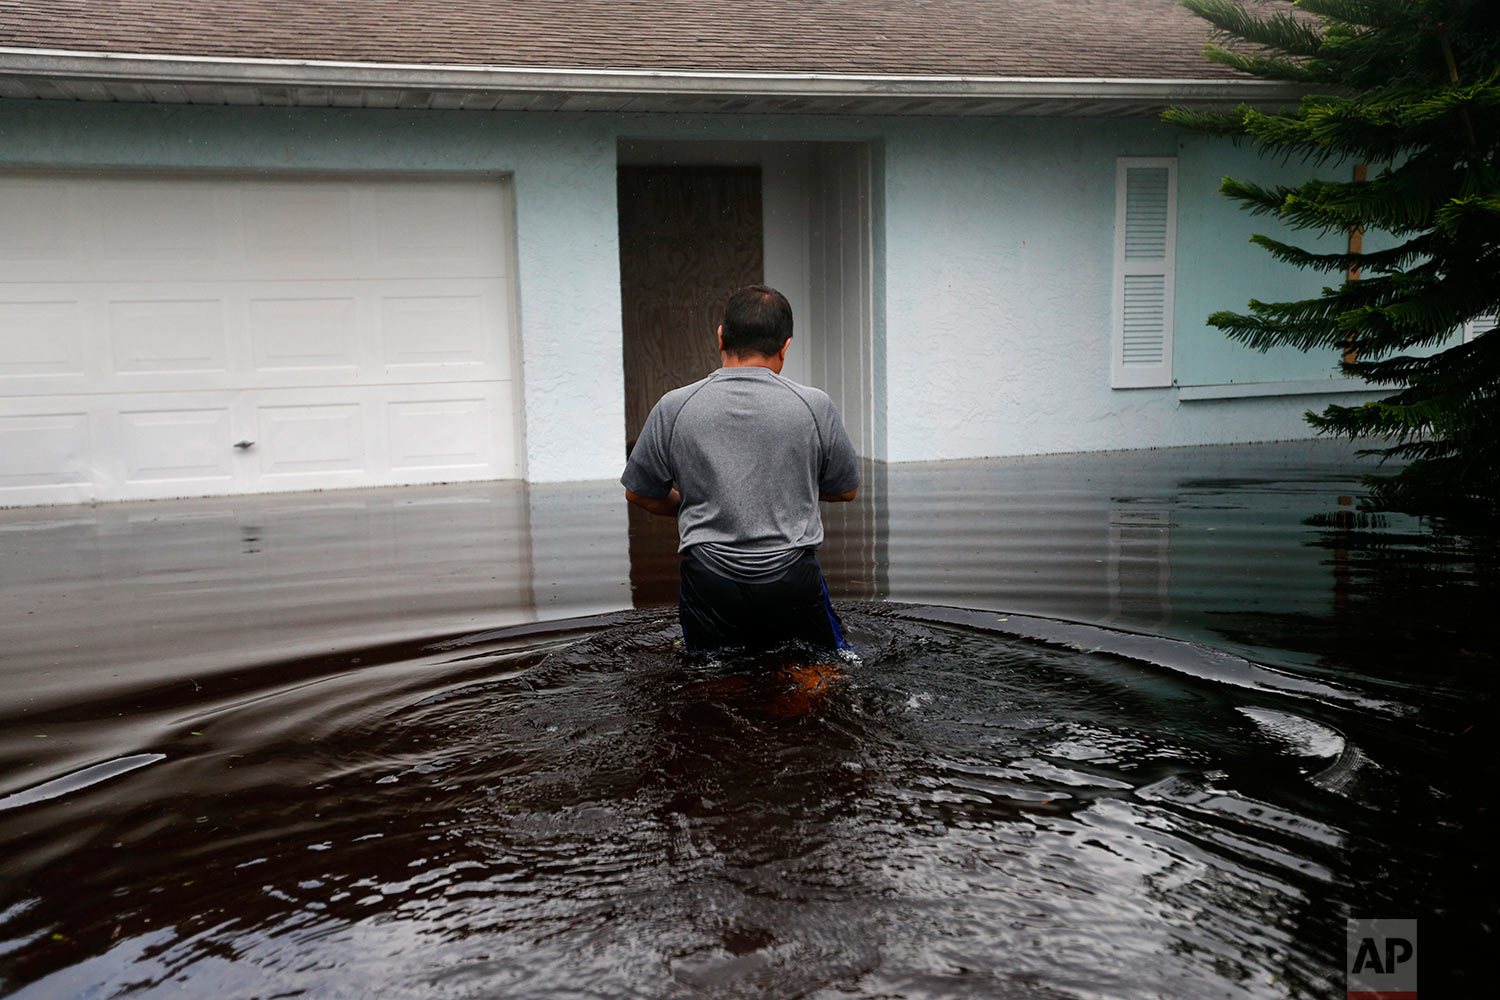  A man returns to his flooded home in the aftermath of Hurricane Irma in Bonita Springs, Fla., Monday, Sept. 11, 2017. (AP Photo/Gerald Herbert) 